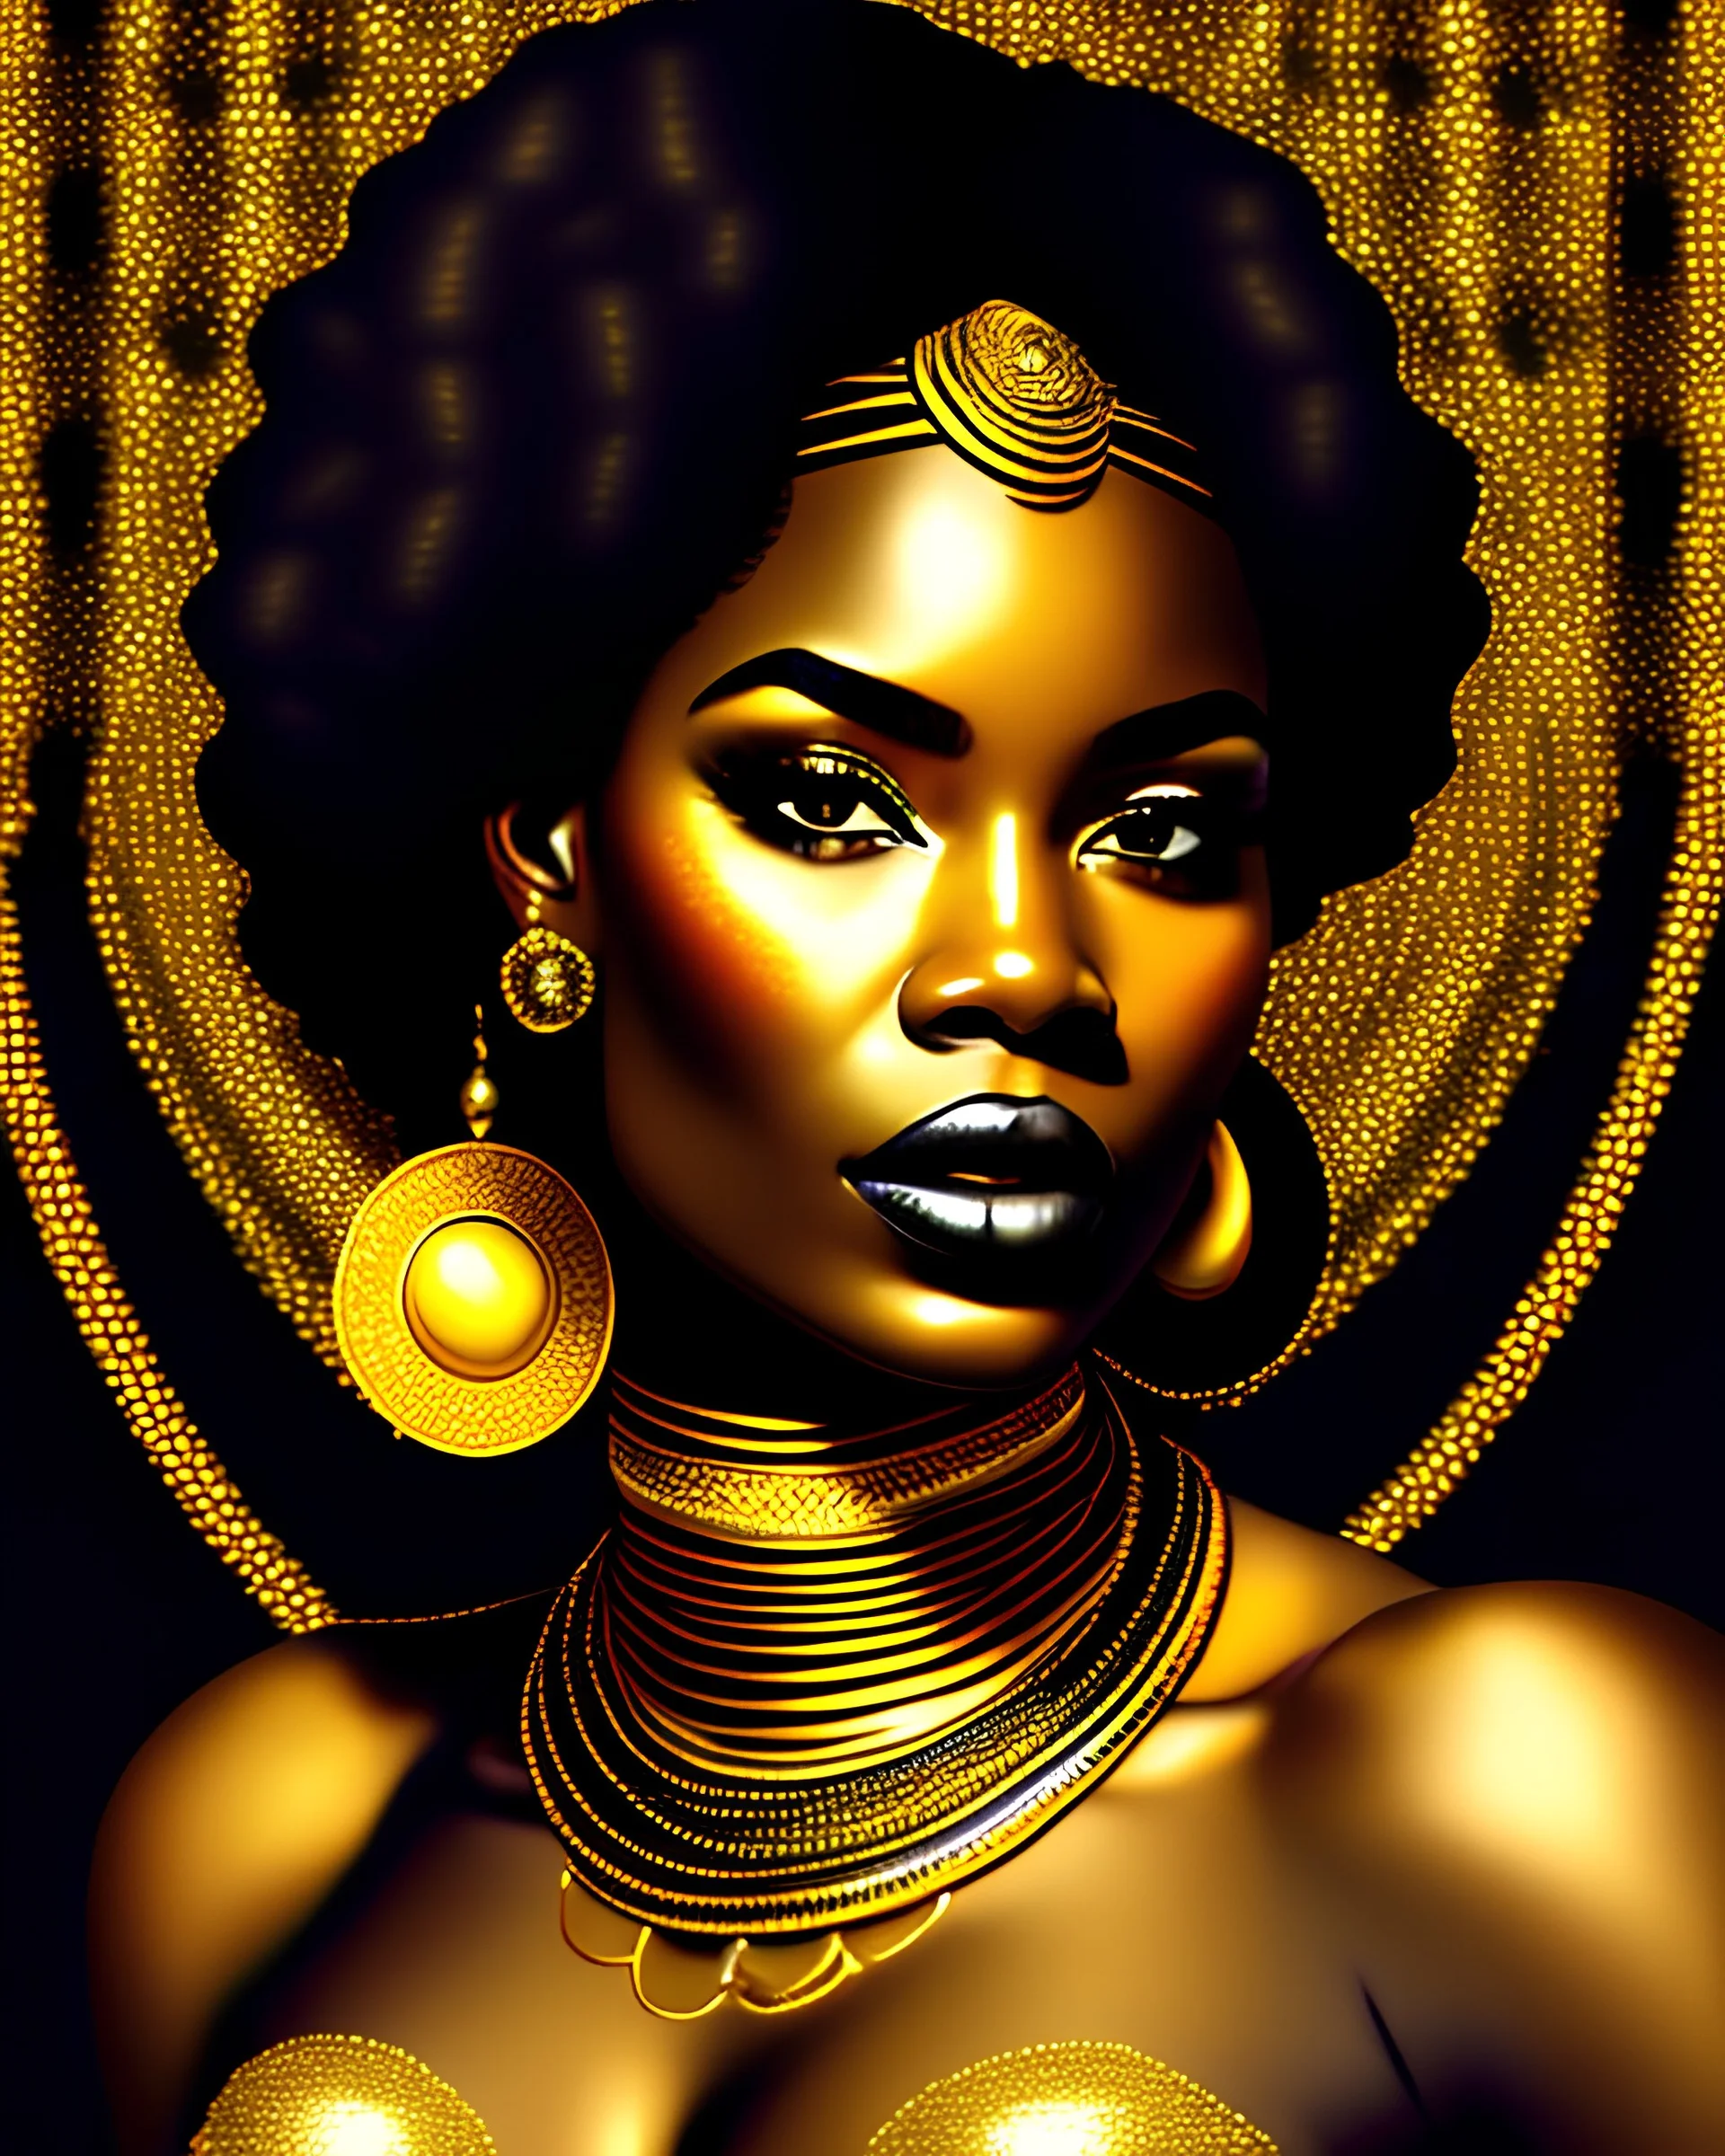 make a black background, Black ,Gold ethnic woman in the style of a